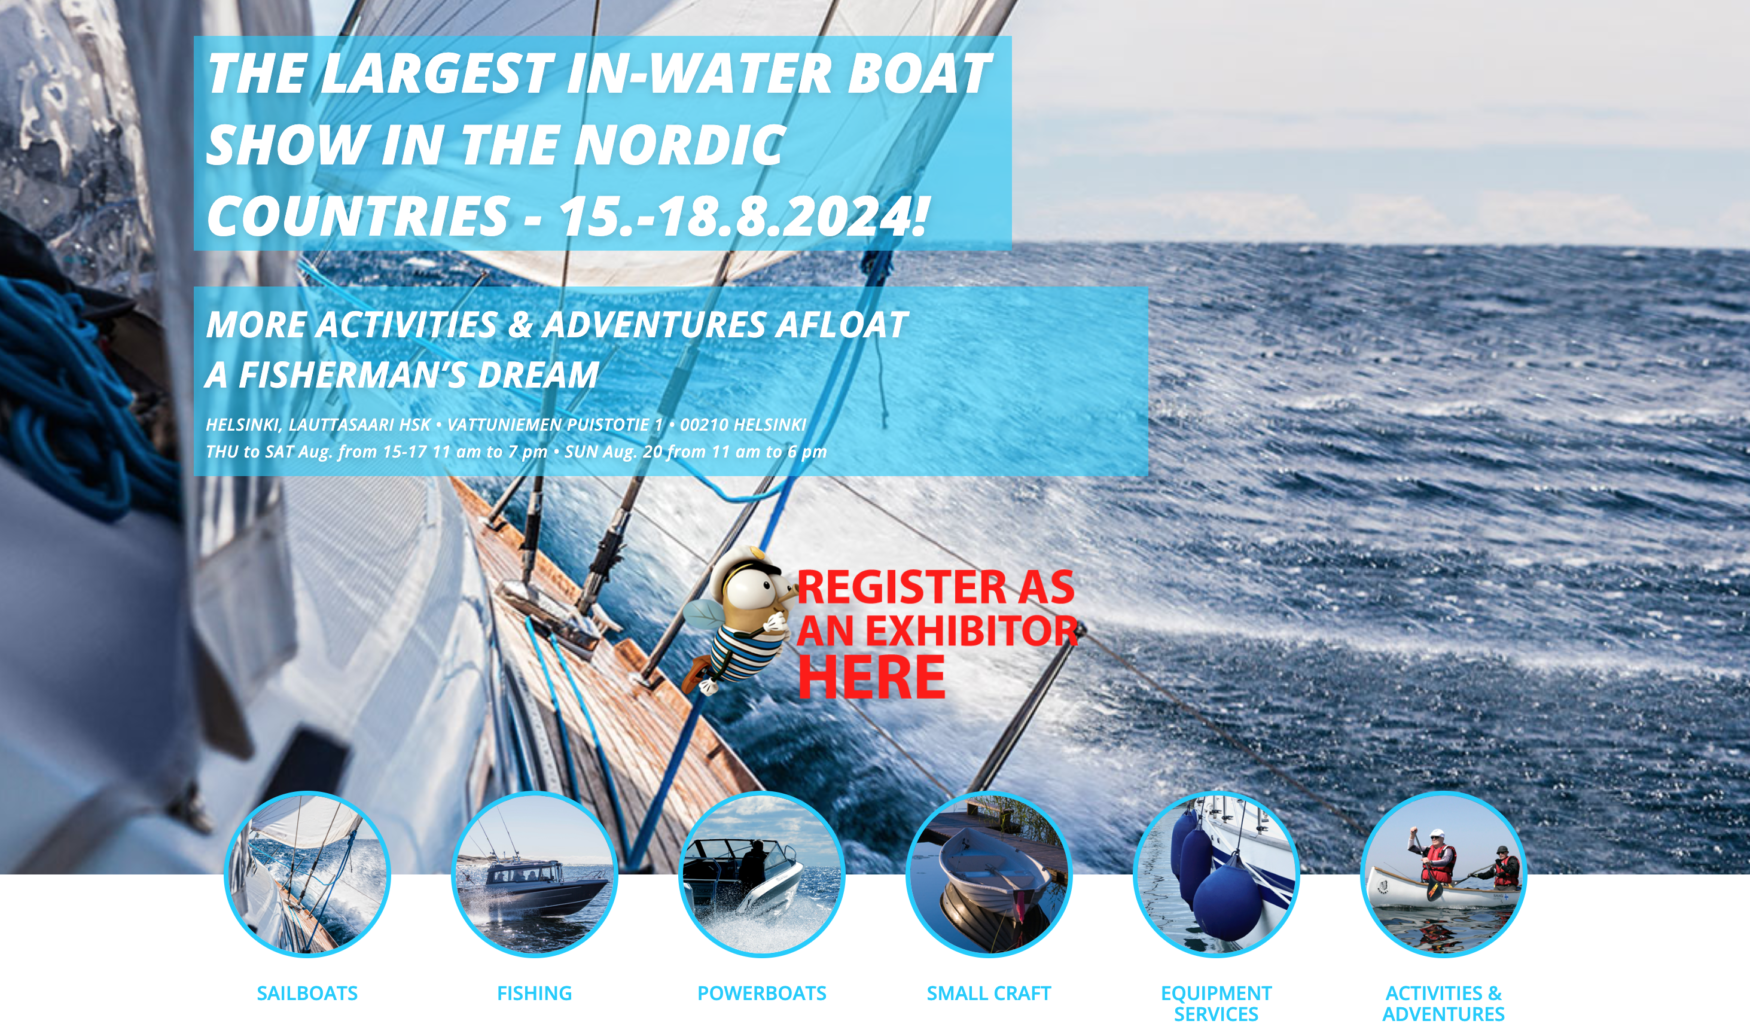 Visit YANMAR Marine at the largest in-water boat show in the Nordic countries!